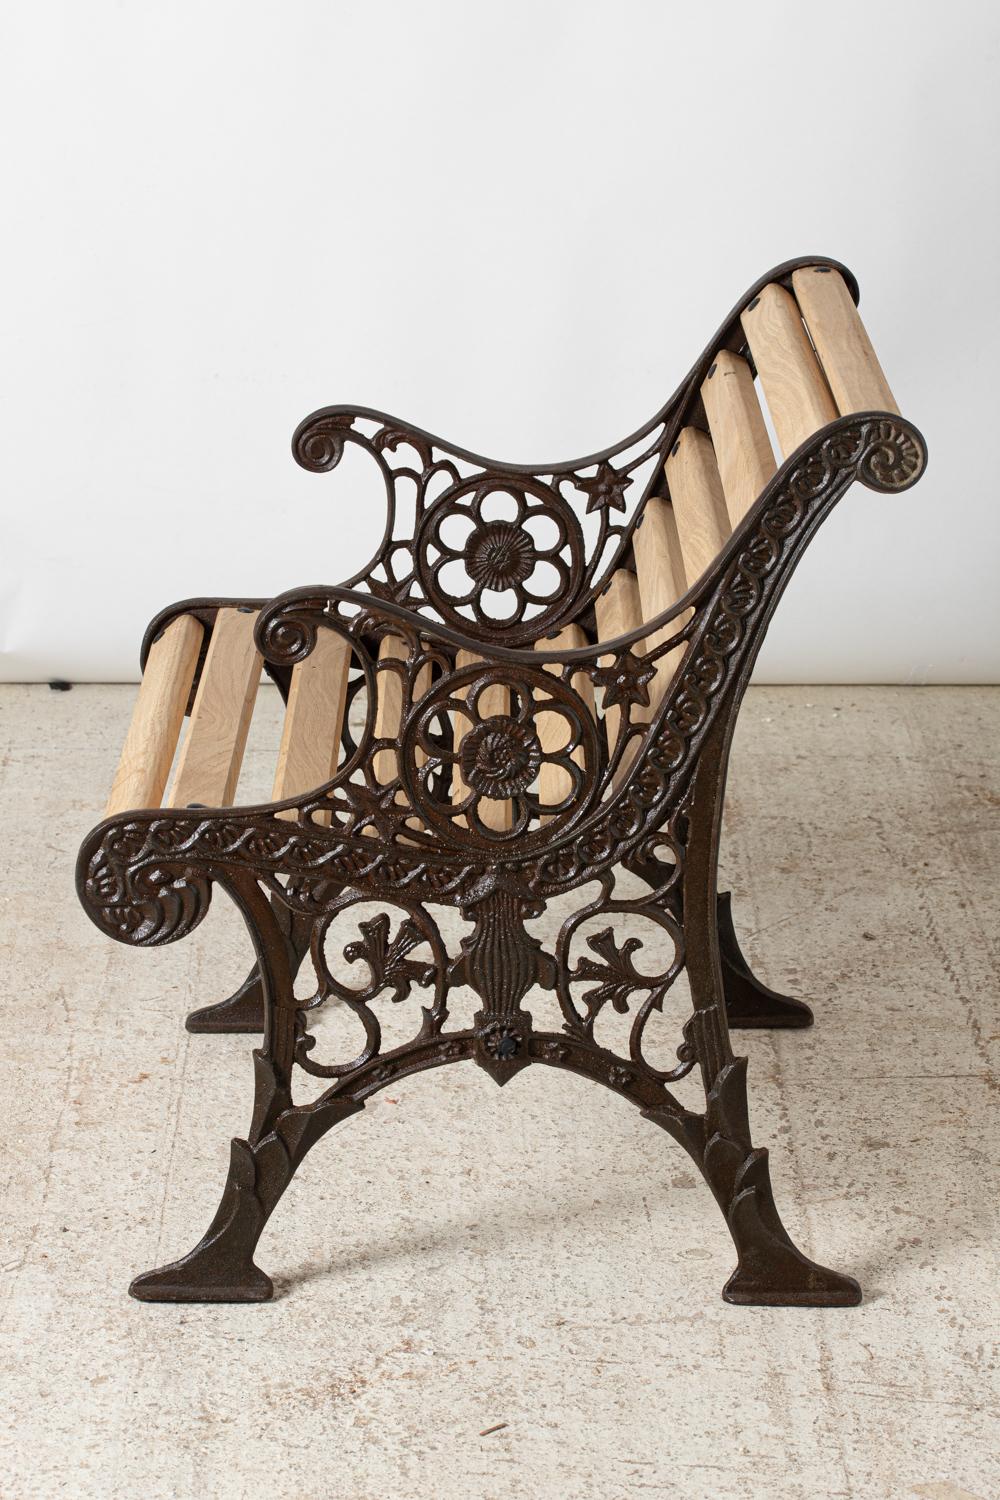 wrought iron and wood garden furniture